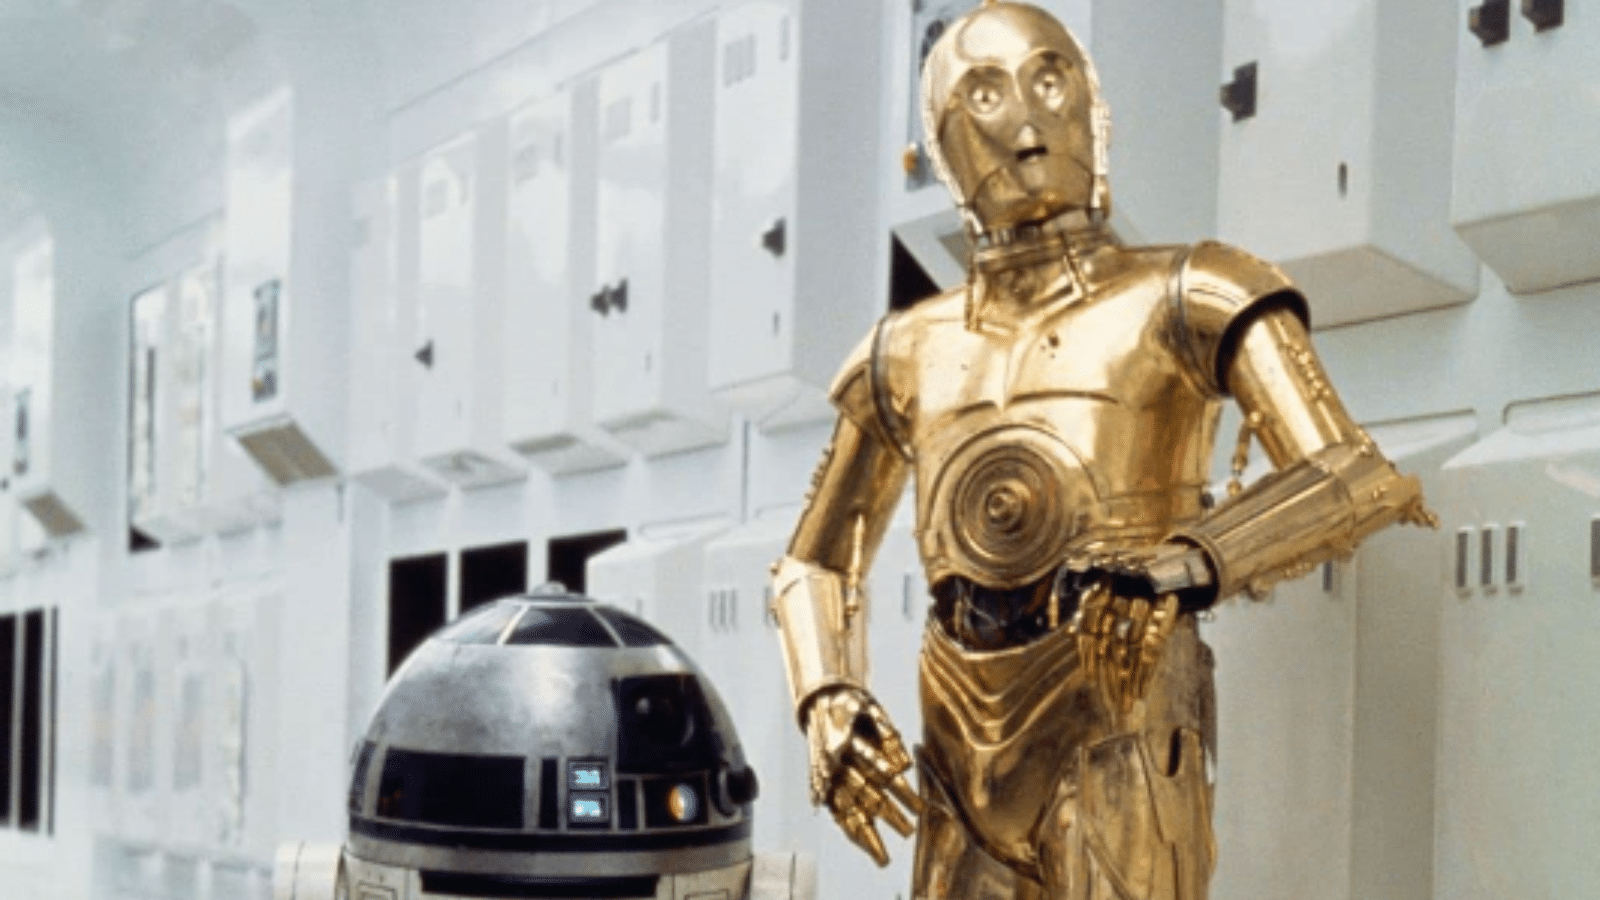 A New Hope C-3PO and R2-D2 Anthony Daniels Kenny Baker